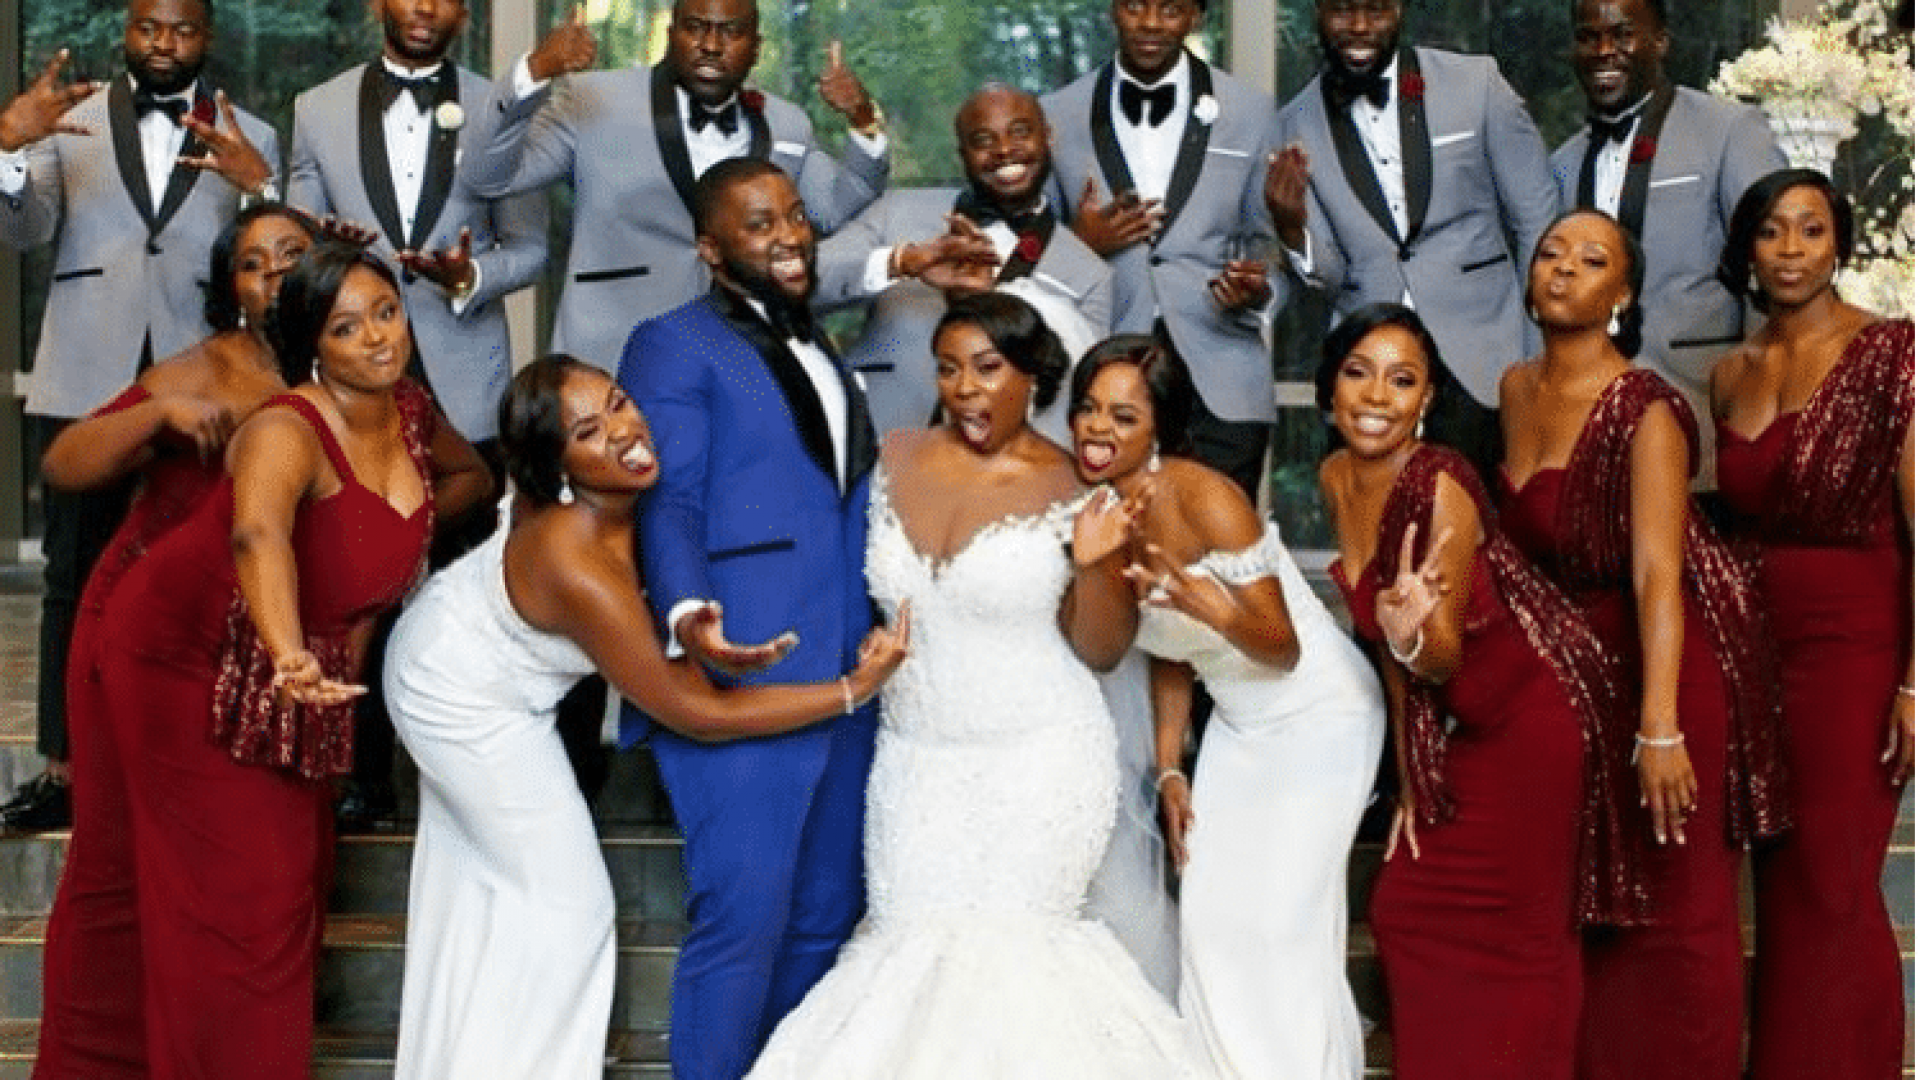 Black Wedding Moment Of The Day: This Groom's Heartfelt Vows Have Us Shedding Real Tears